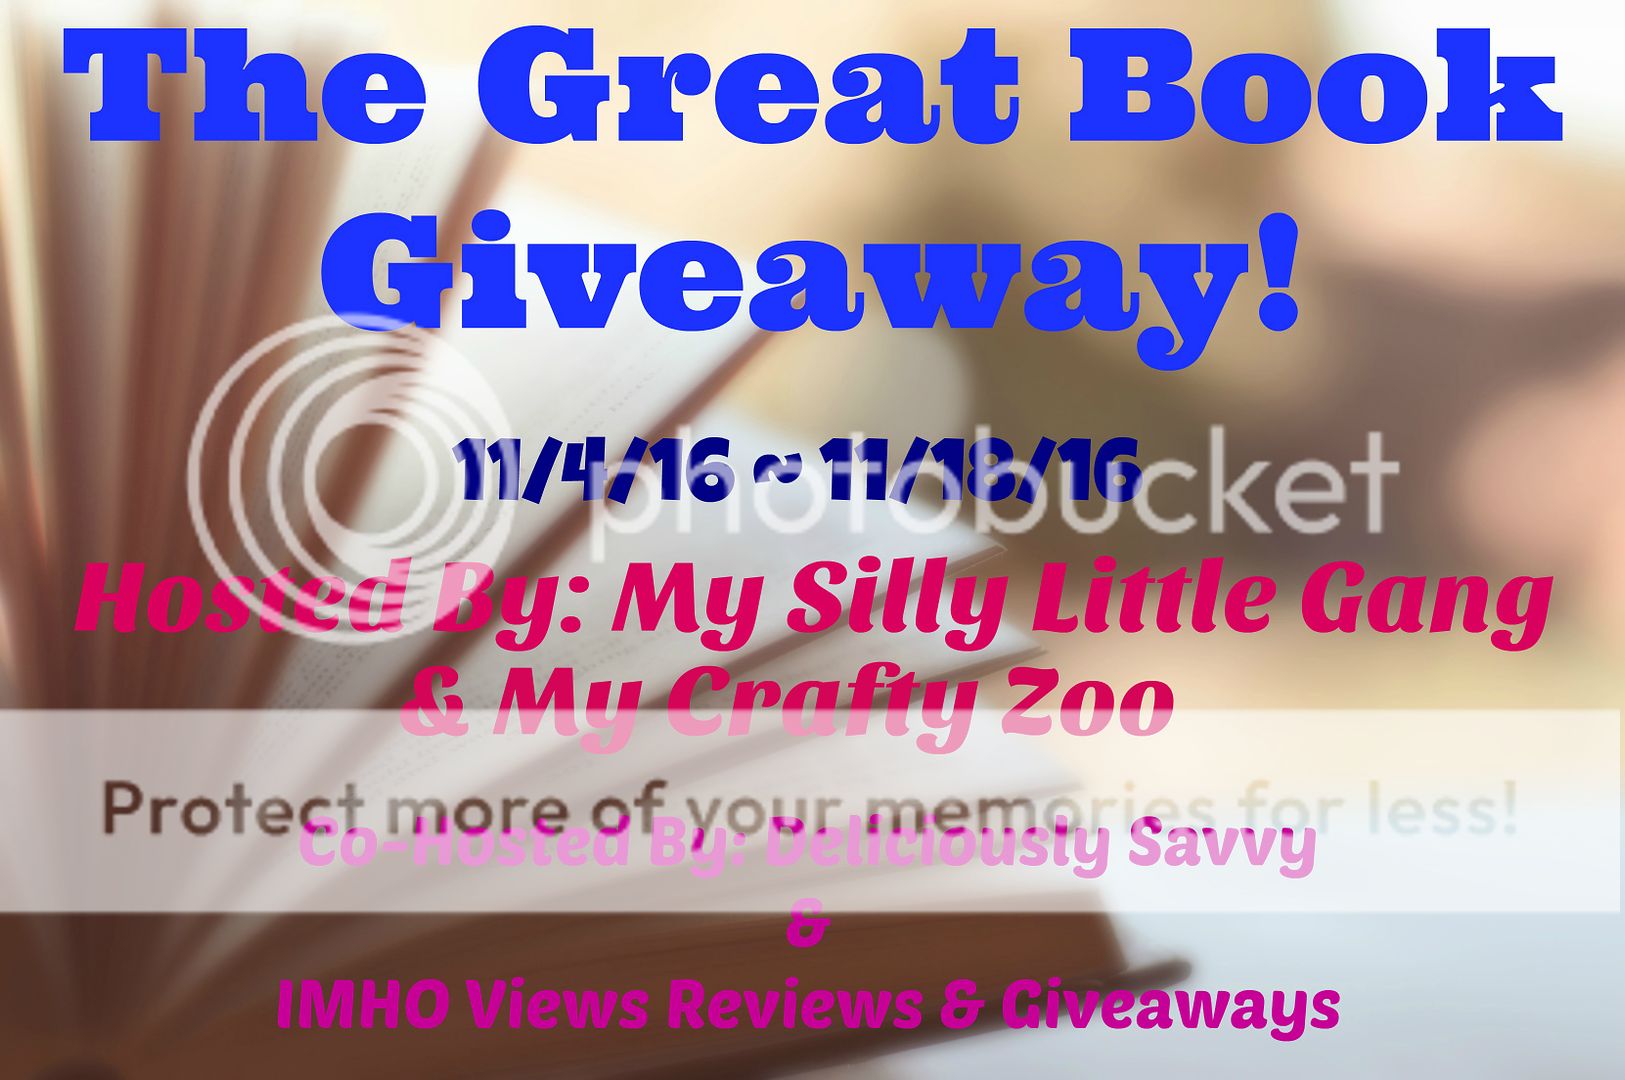 The great book giveaway